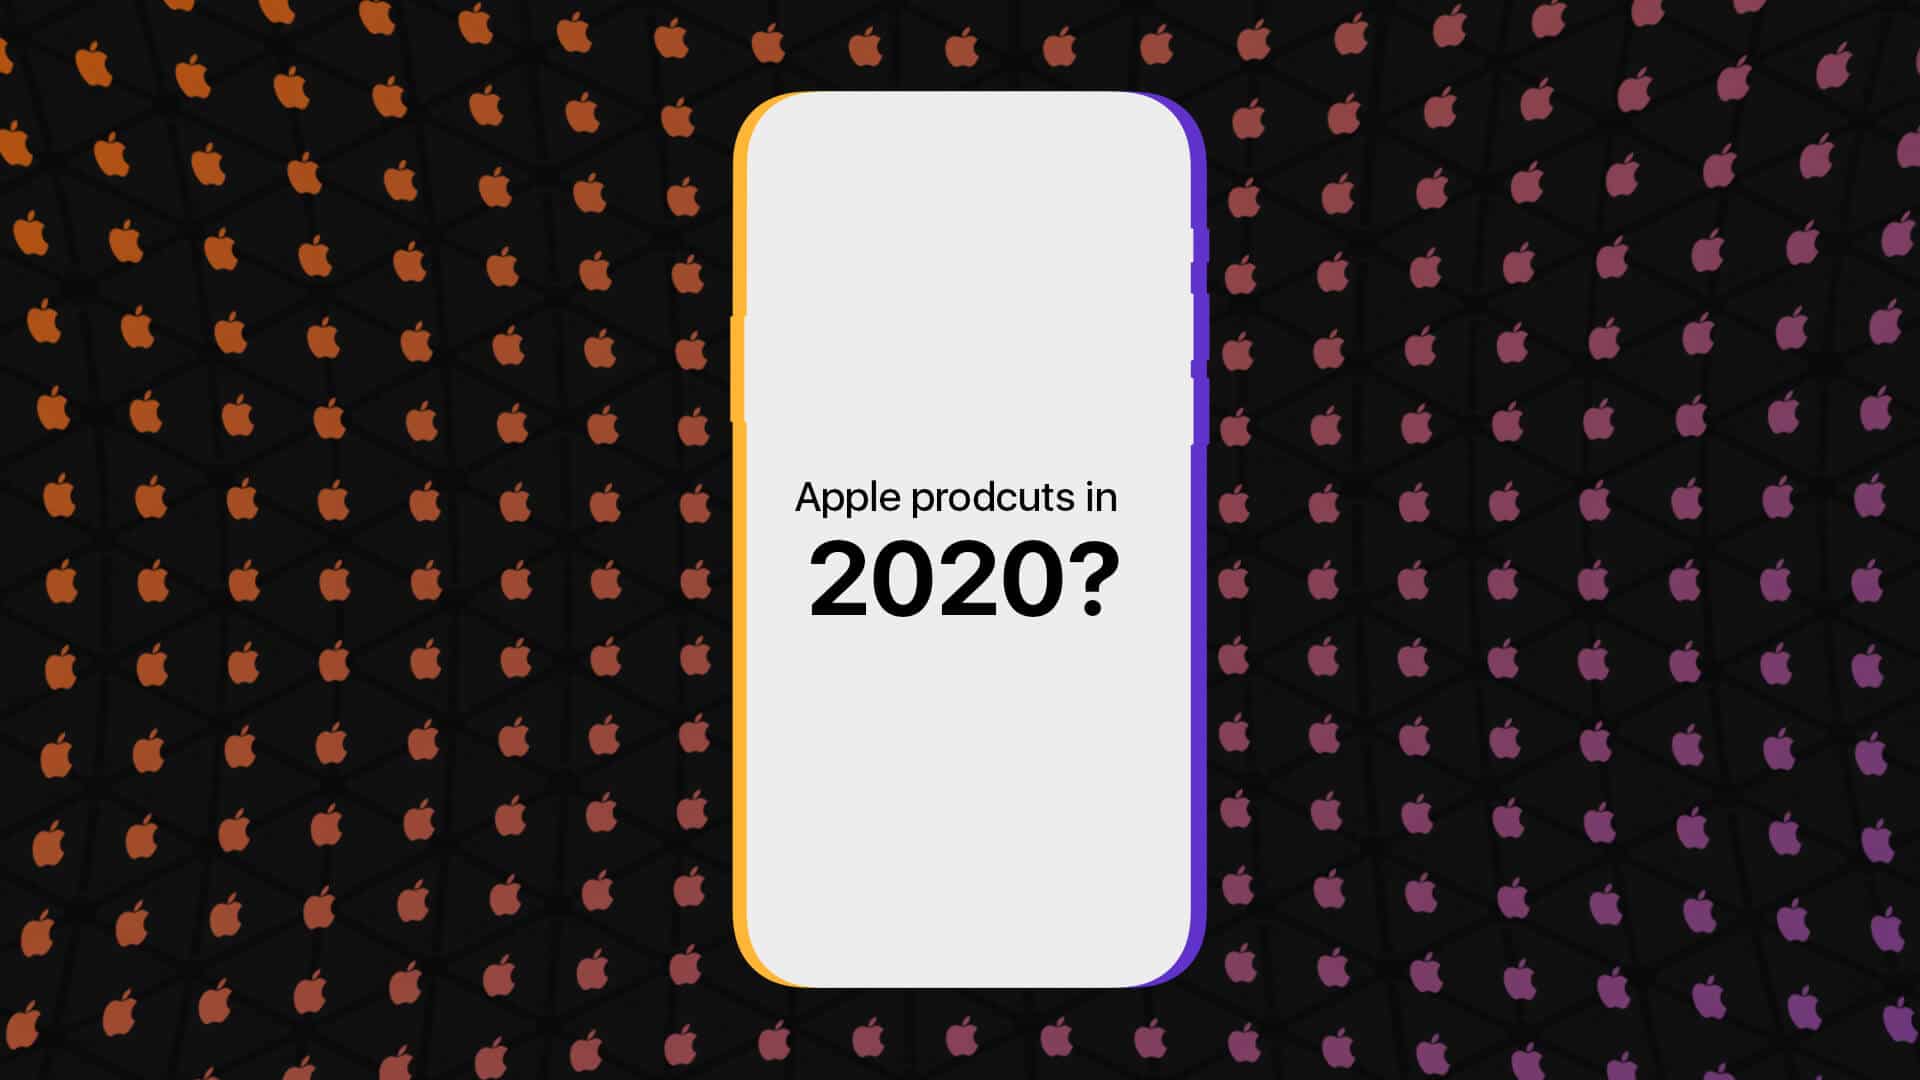 What to expect from apple in 2020